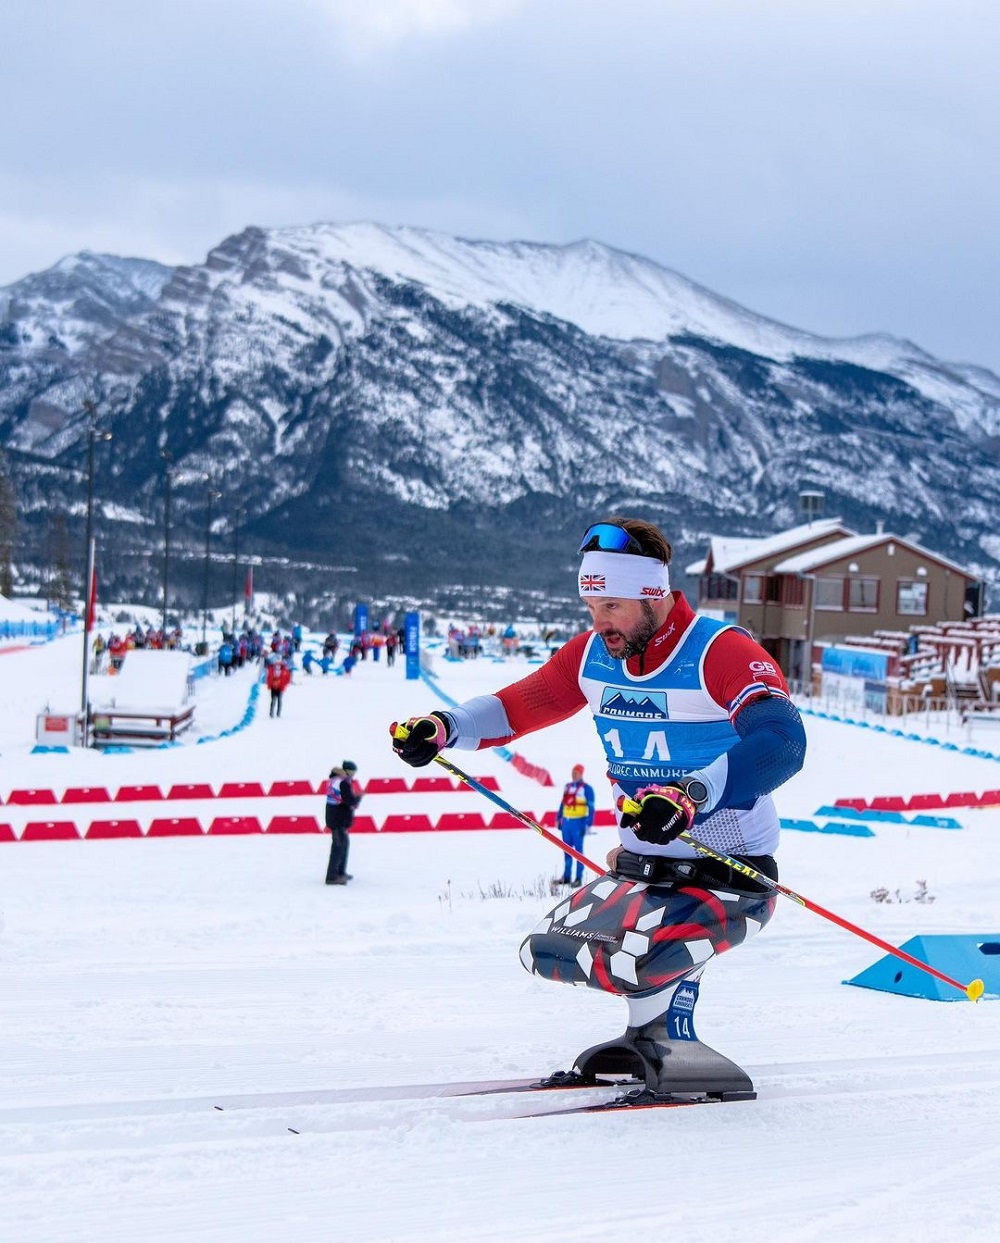 GB Para Nordic skier, Steve Arnold, putting in the graft at the Alberta World Cup event in December